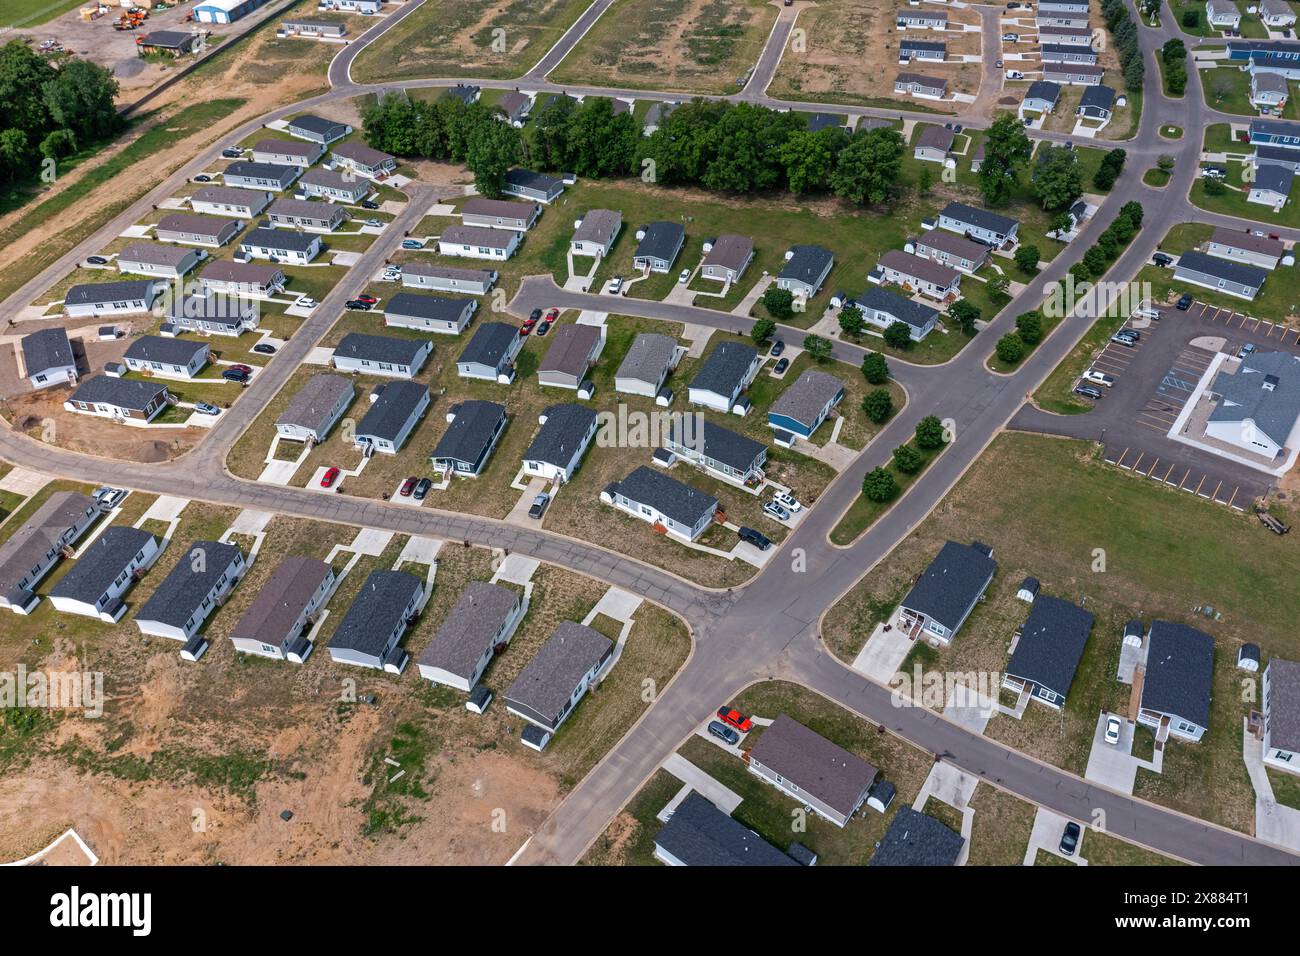 Albion, Michigan - An aerial view of the Wildflower Crossing mobile home park. Stock Photo